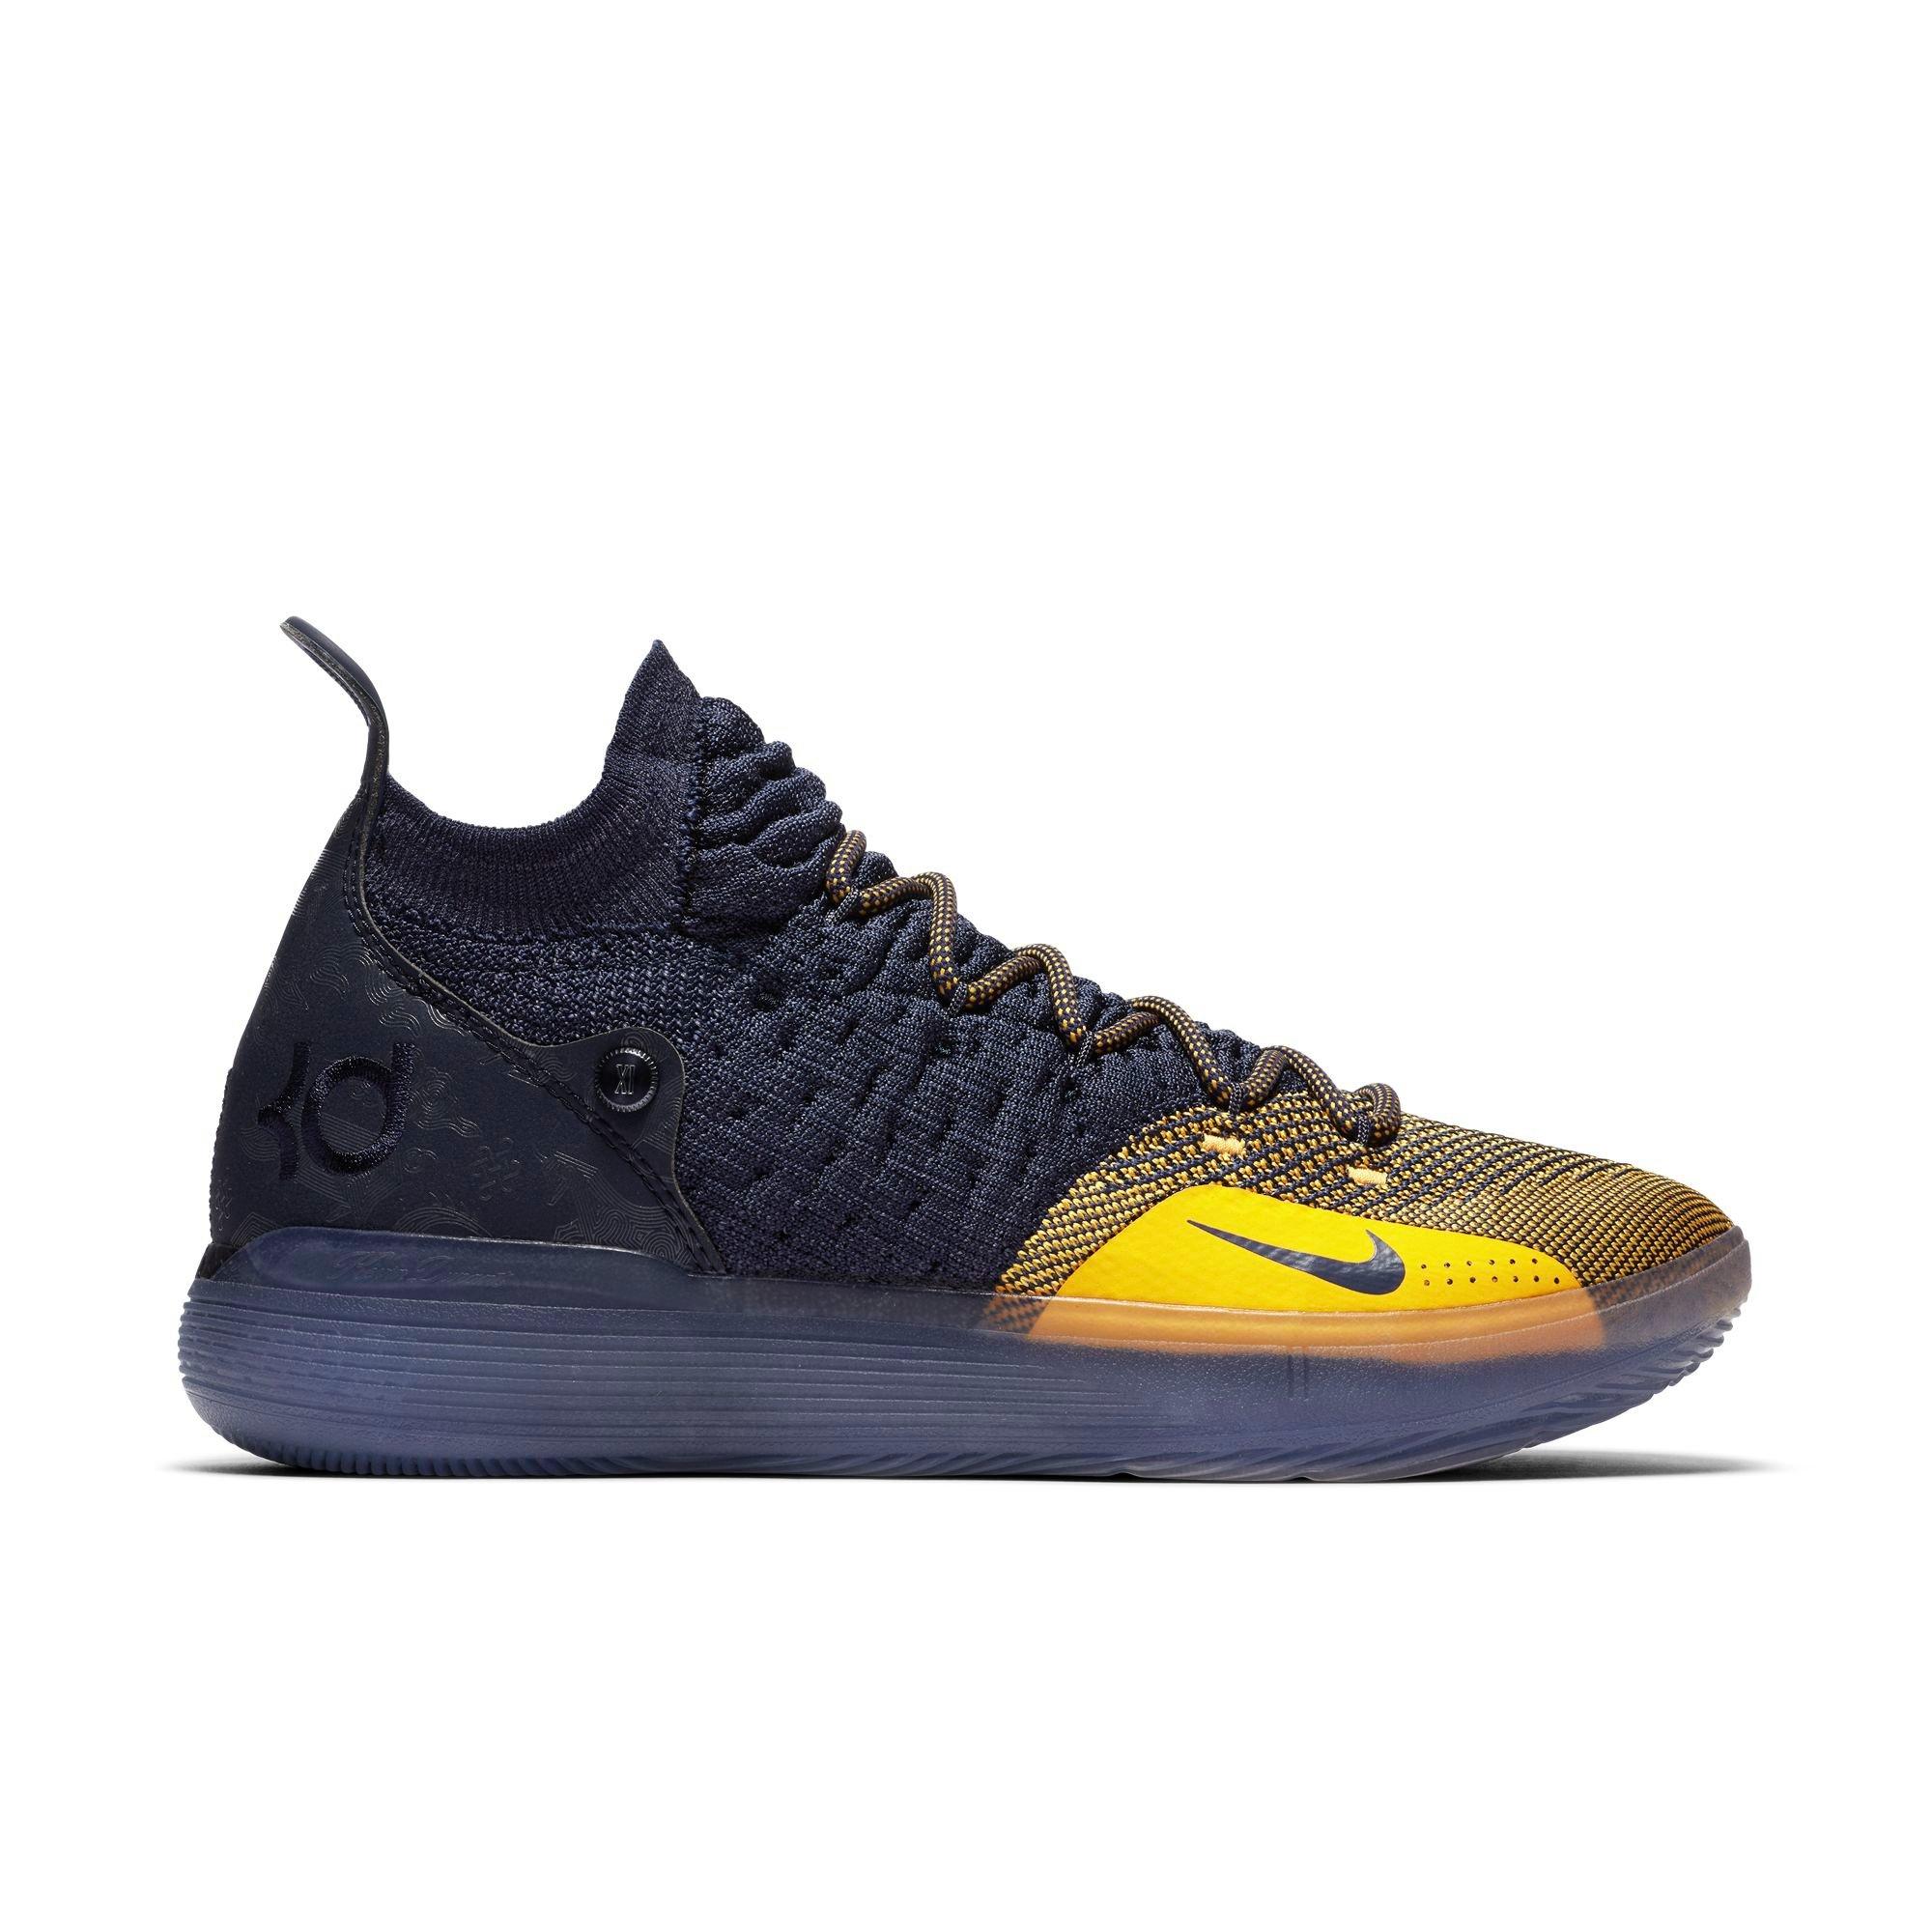 kd 11 navy and yellow